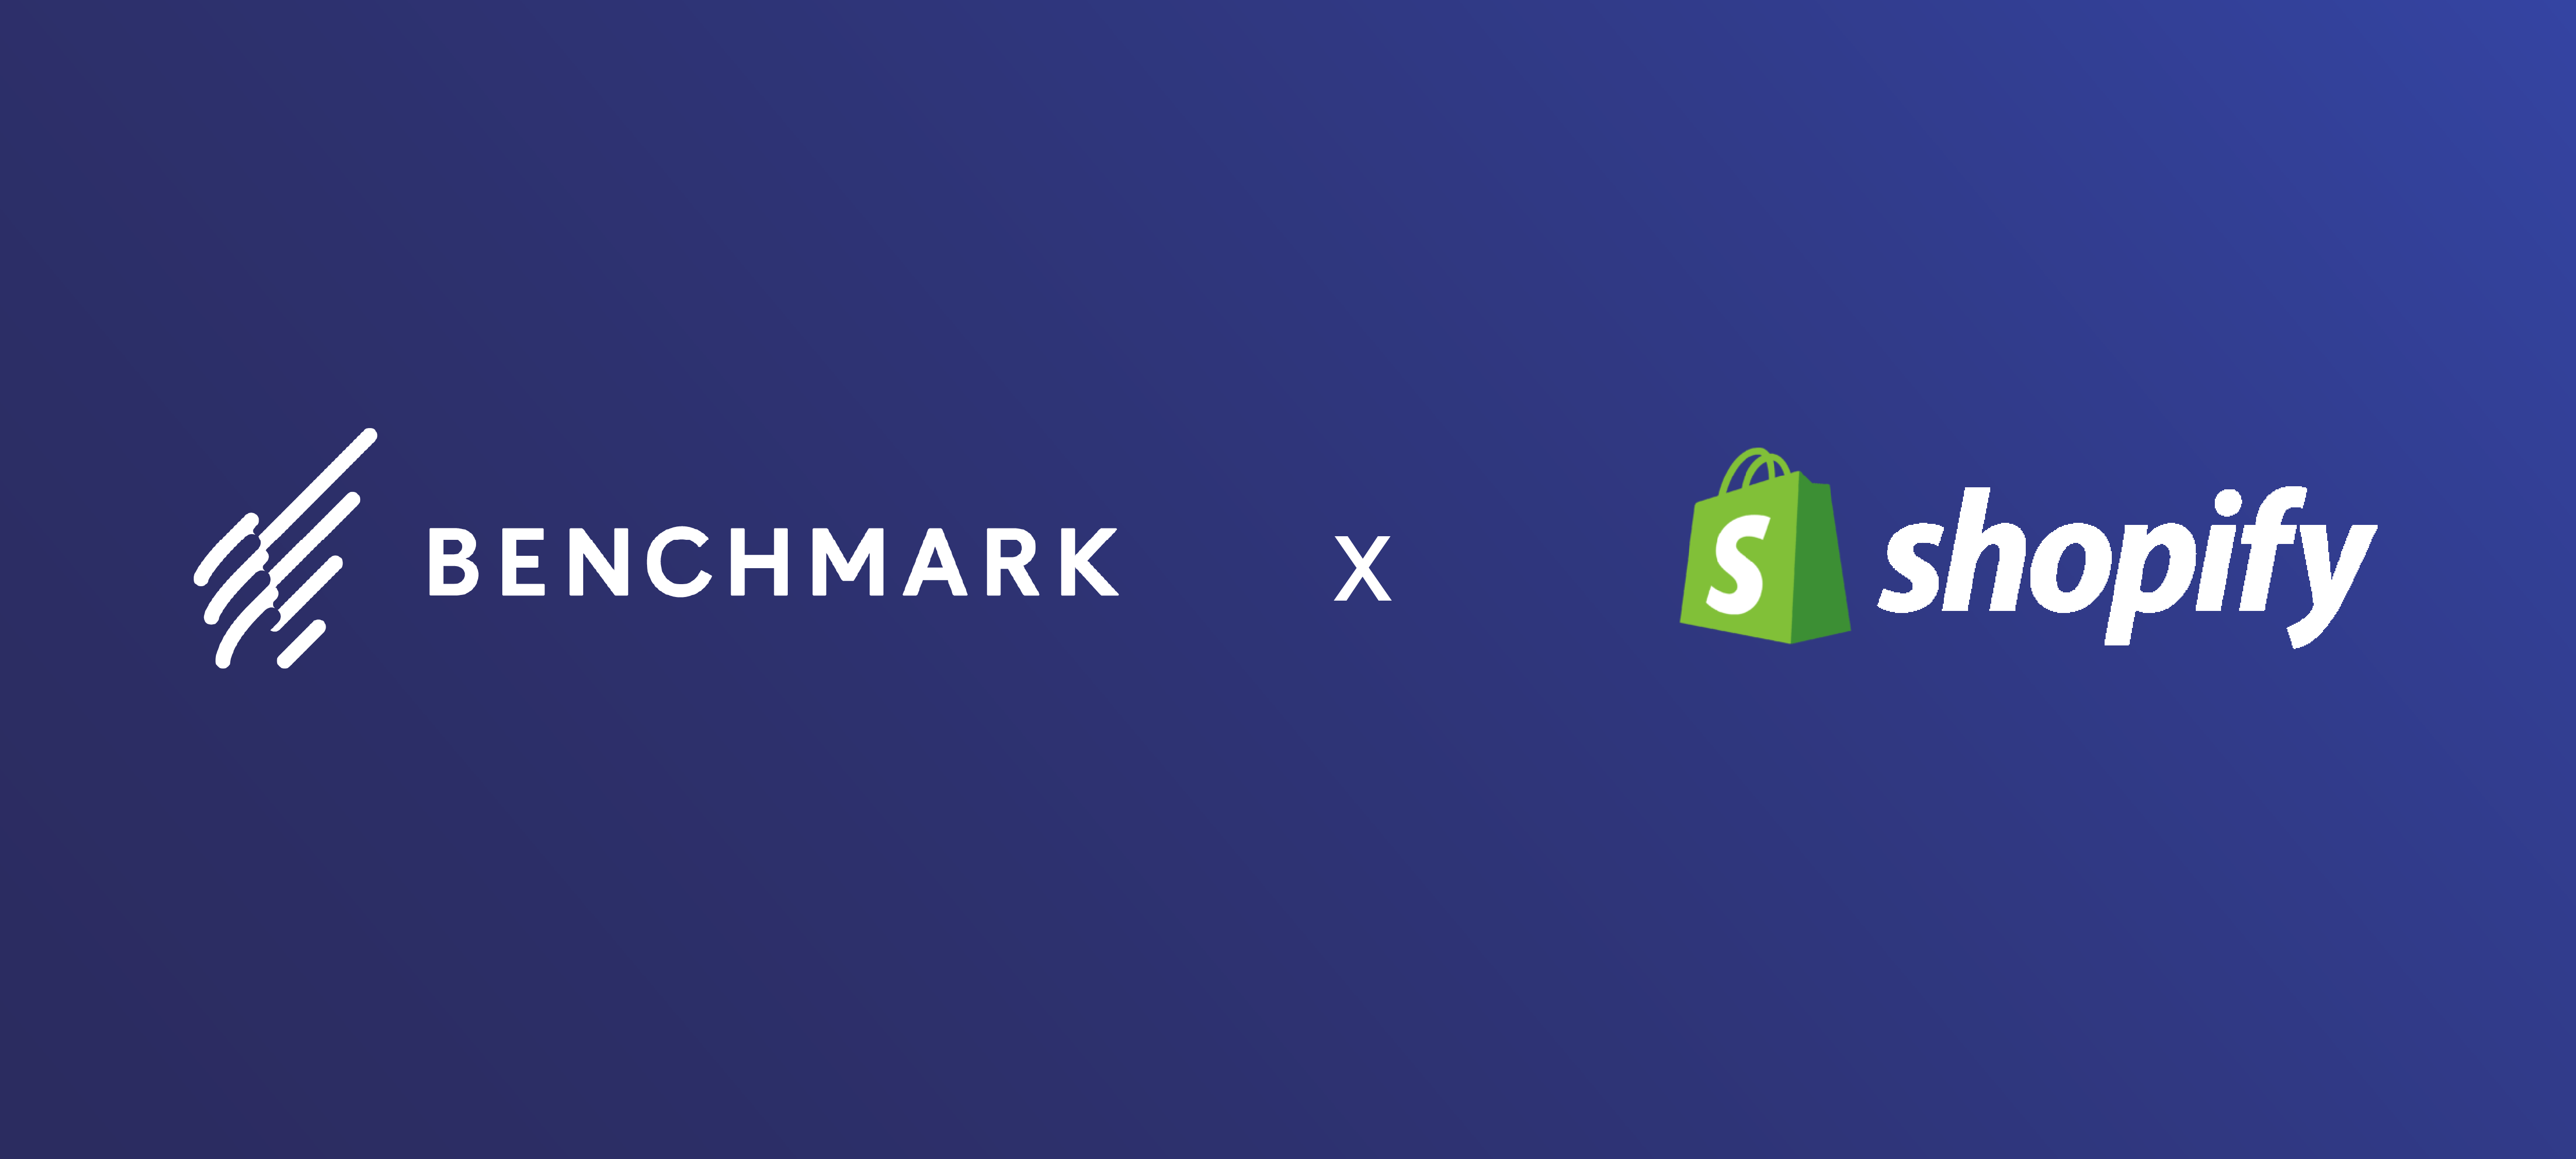 Our Shopify integration just got an upgrade!